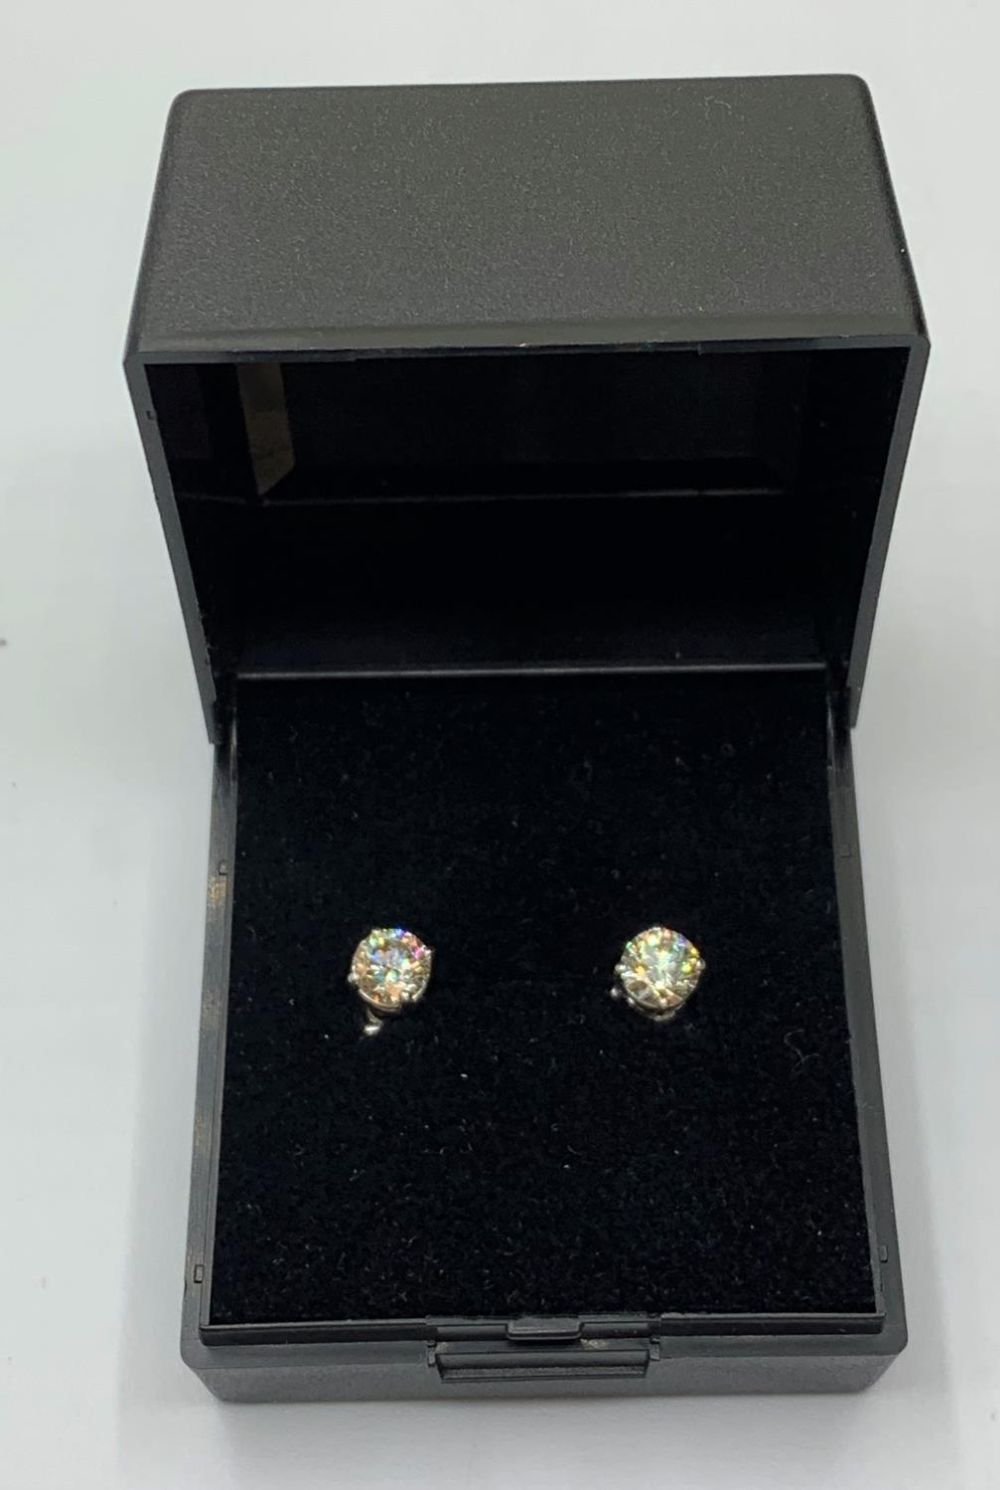 Pair of Diamond Stud Earrings with 1.02ct diamond in 18ct white gold - Image 3 of 4